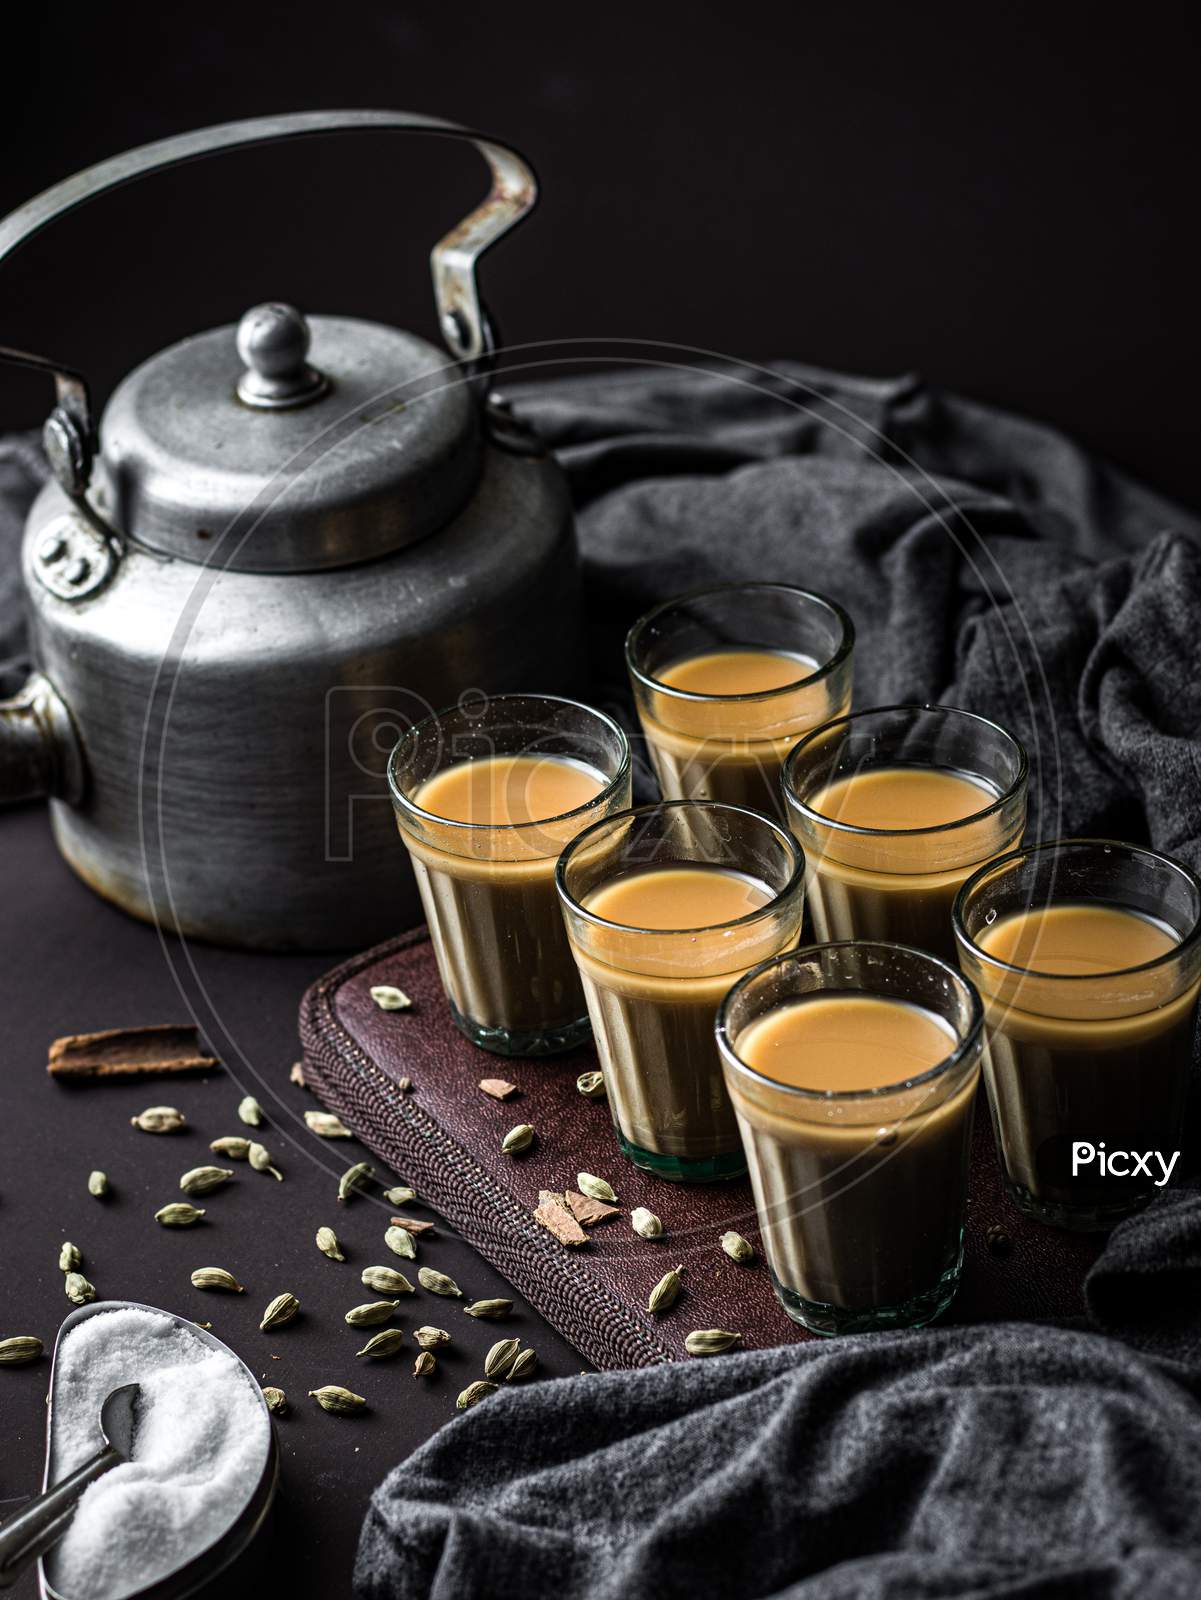 Indian chai in glass cups with metal kettle and other masalas to make the tea.